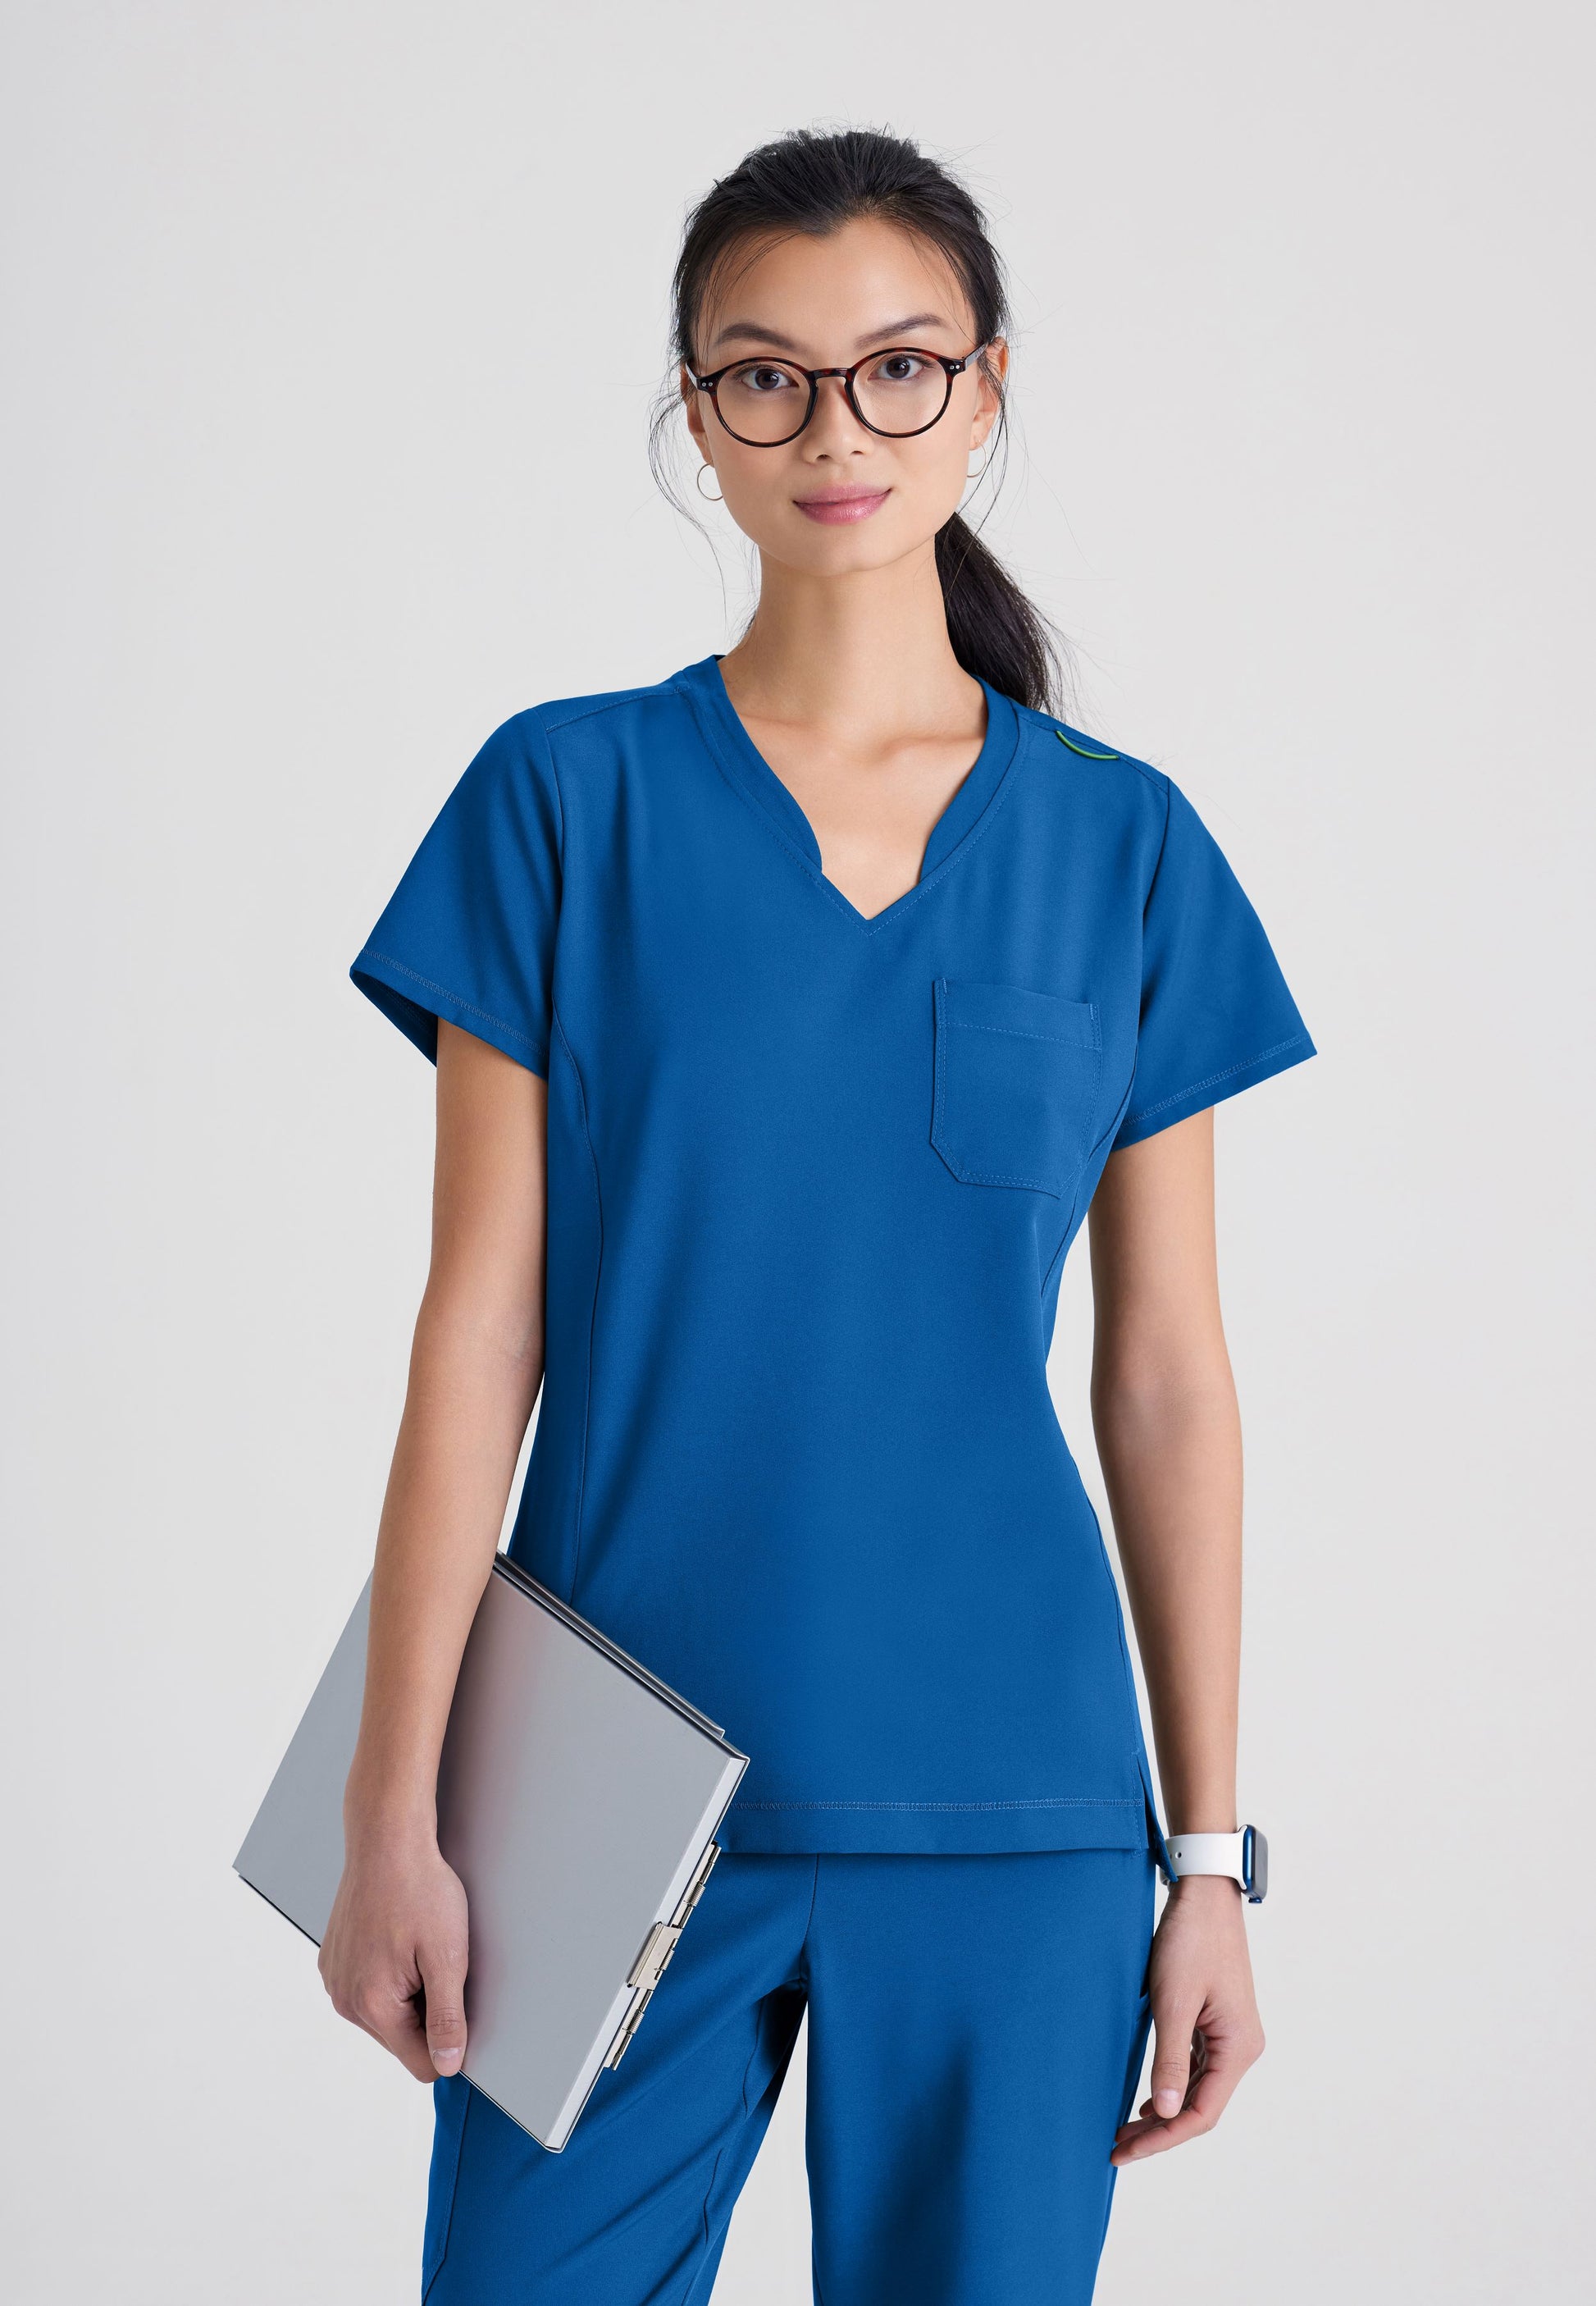 Barco Grey's Anatomy Evolve GSST181 Sway Tuck In Top Royal